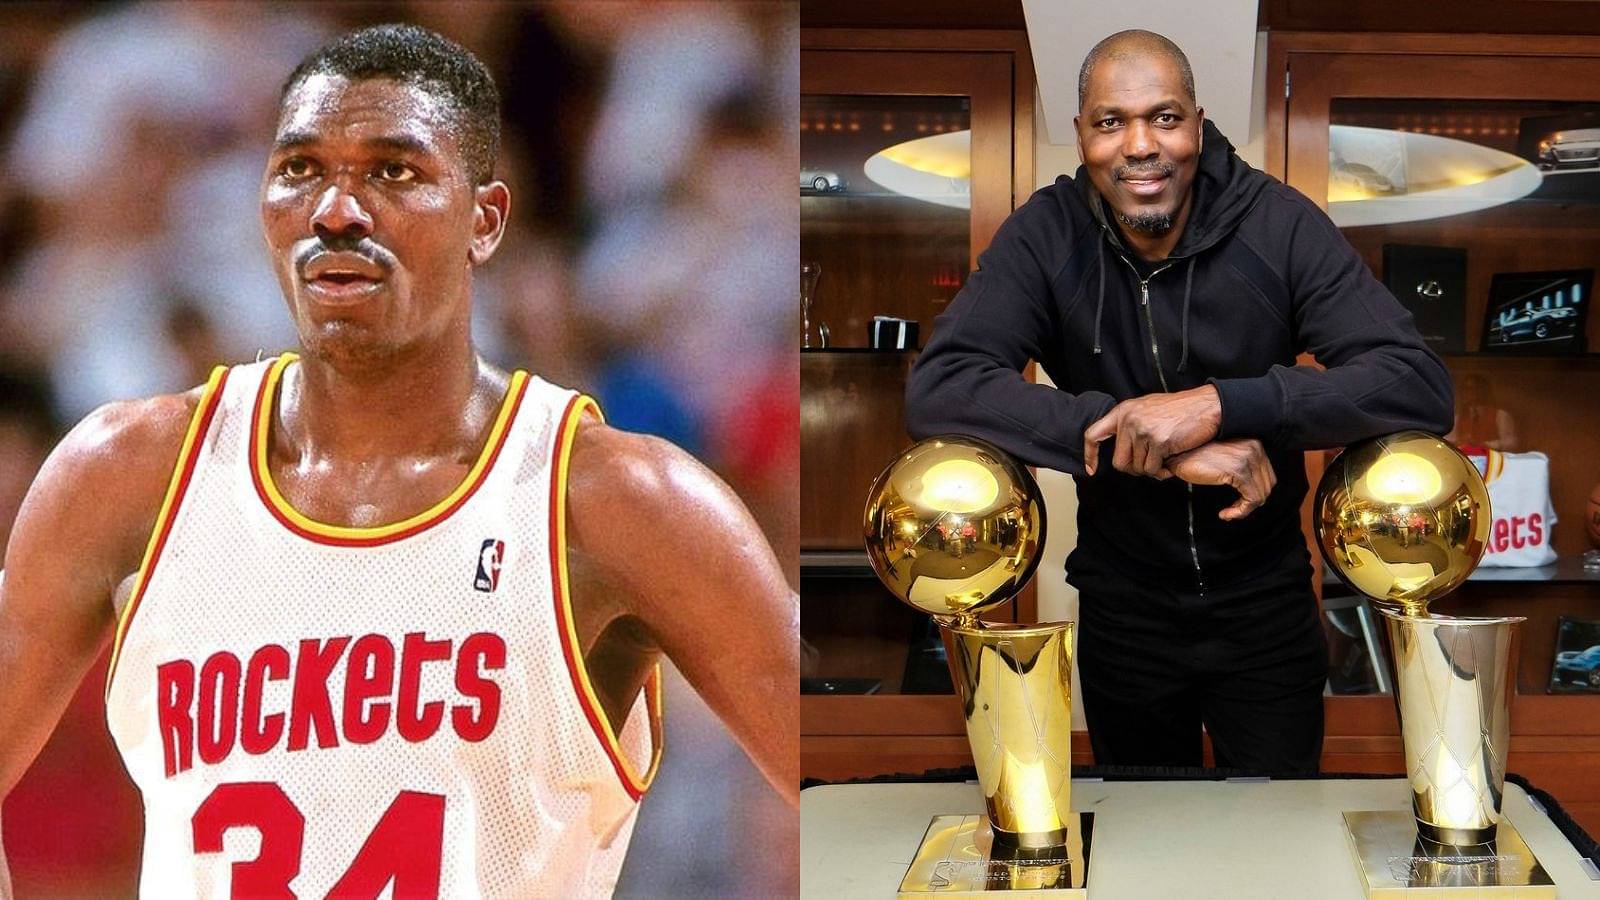 $300M Hakeem Olajuwon once called Houston Rocket's owner a ‘Coward’ for accusing The Dream of faking an injury